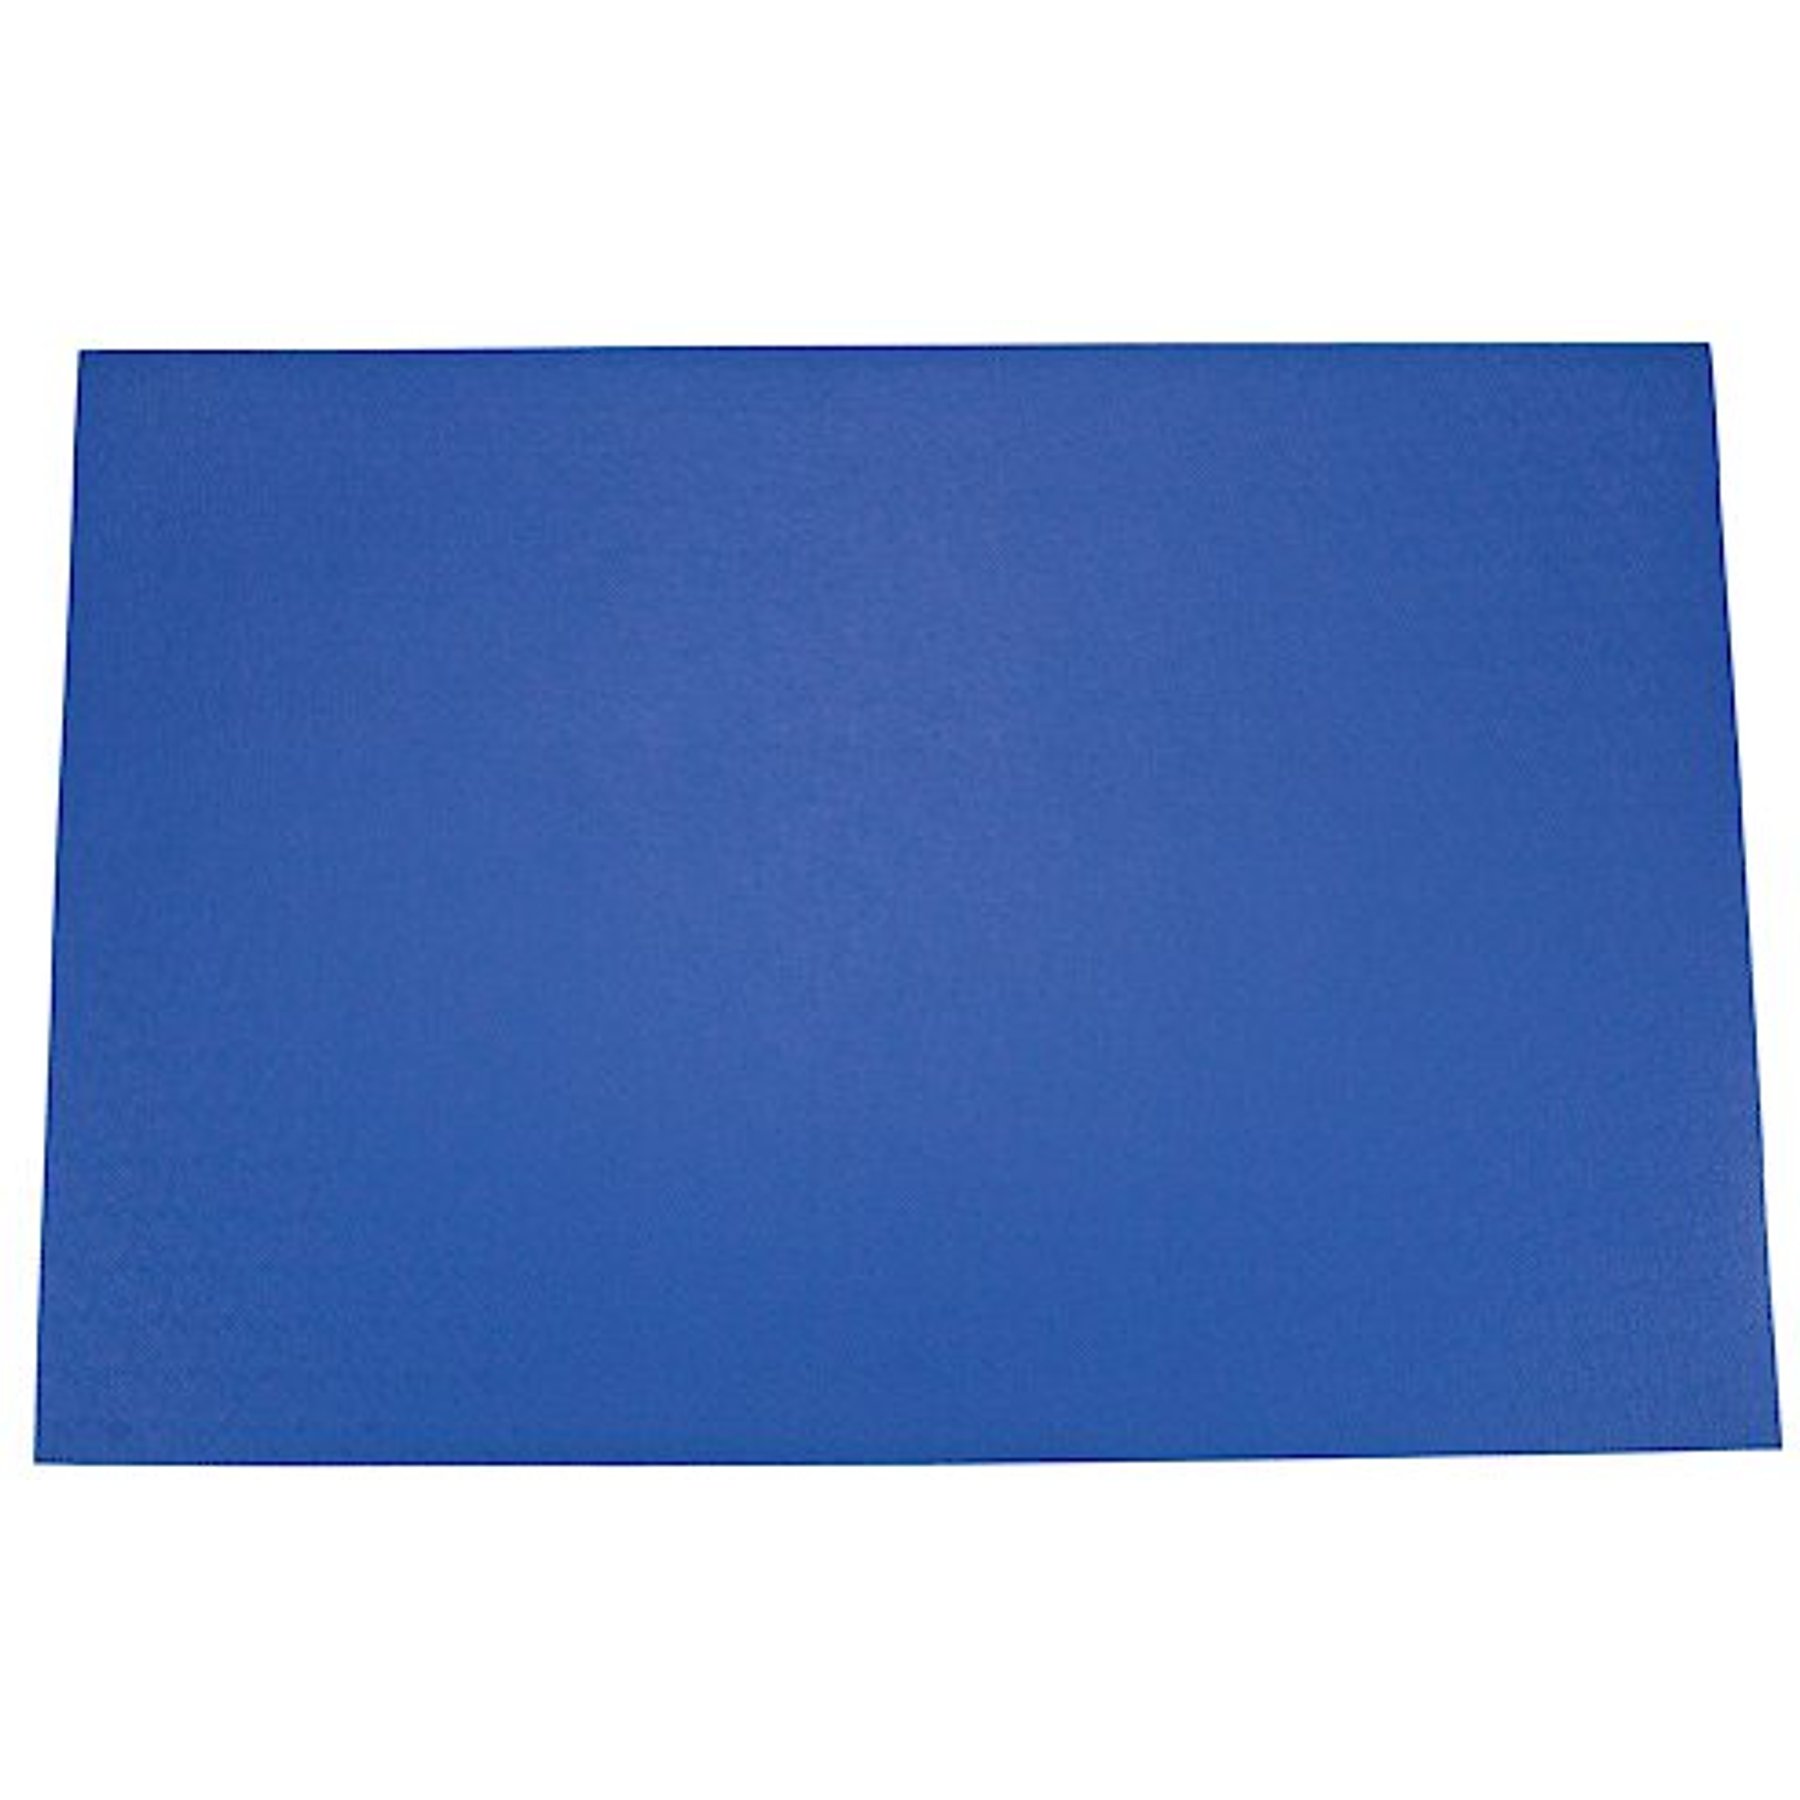 Top Performance Table Mat 24x48in Blue